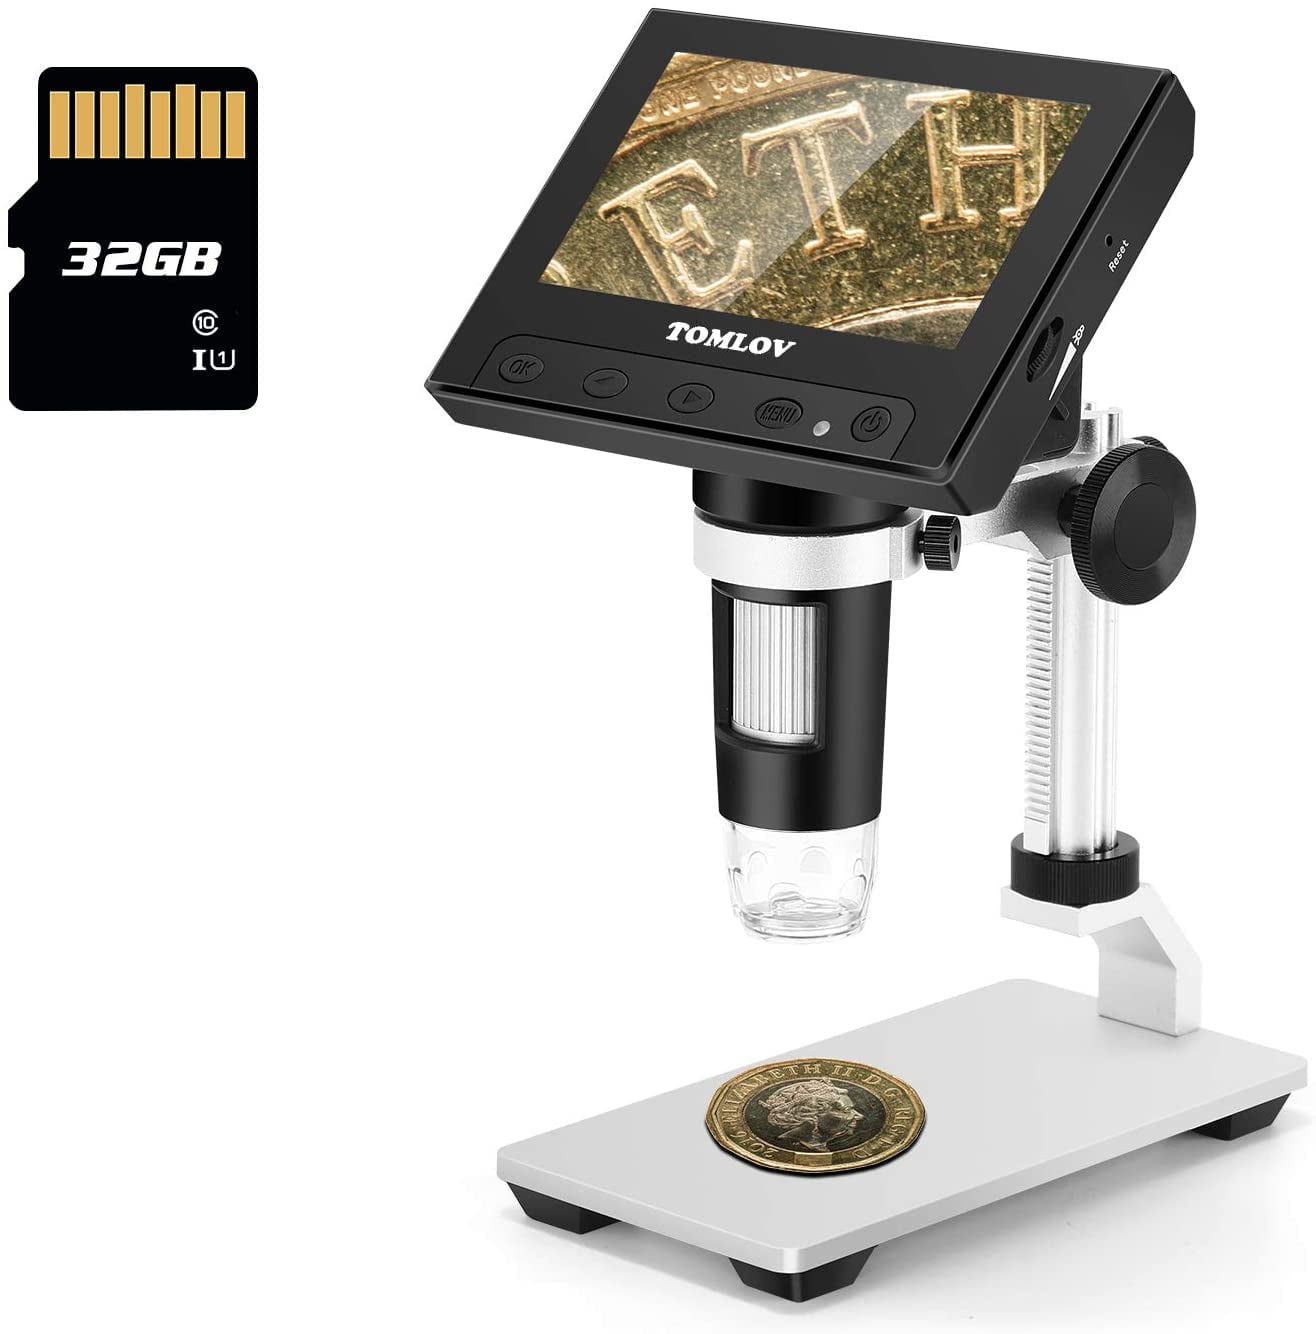 TOMLOV Coin Microscope 1000X 4.3 LCD Digital Microscope with Metal Stand SD Card Included Model- DM4 Windows Compatible Photo/Video Capture for Adult Kids Observing Coin/Plant/Rocks/PCB 8 LEDs